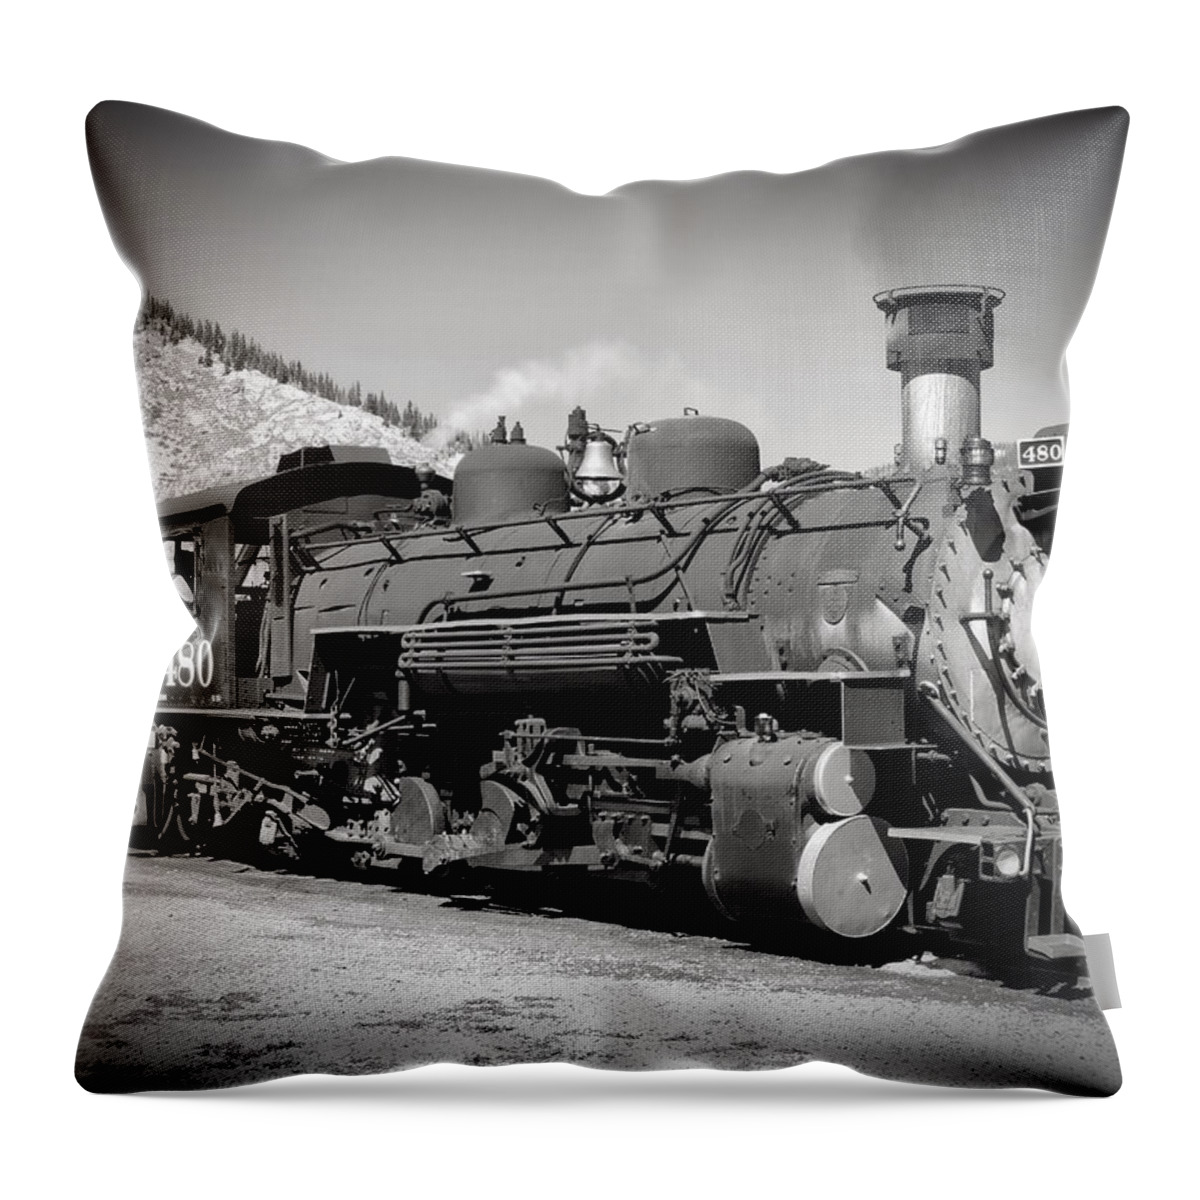 Home Throw Pillow featuring the photograph Steam Engine 480 by Richard Gehlbach